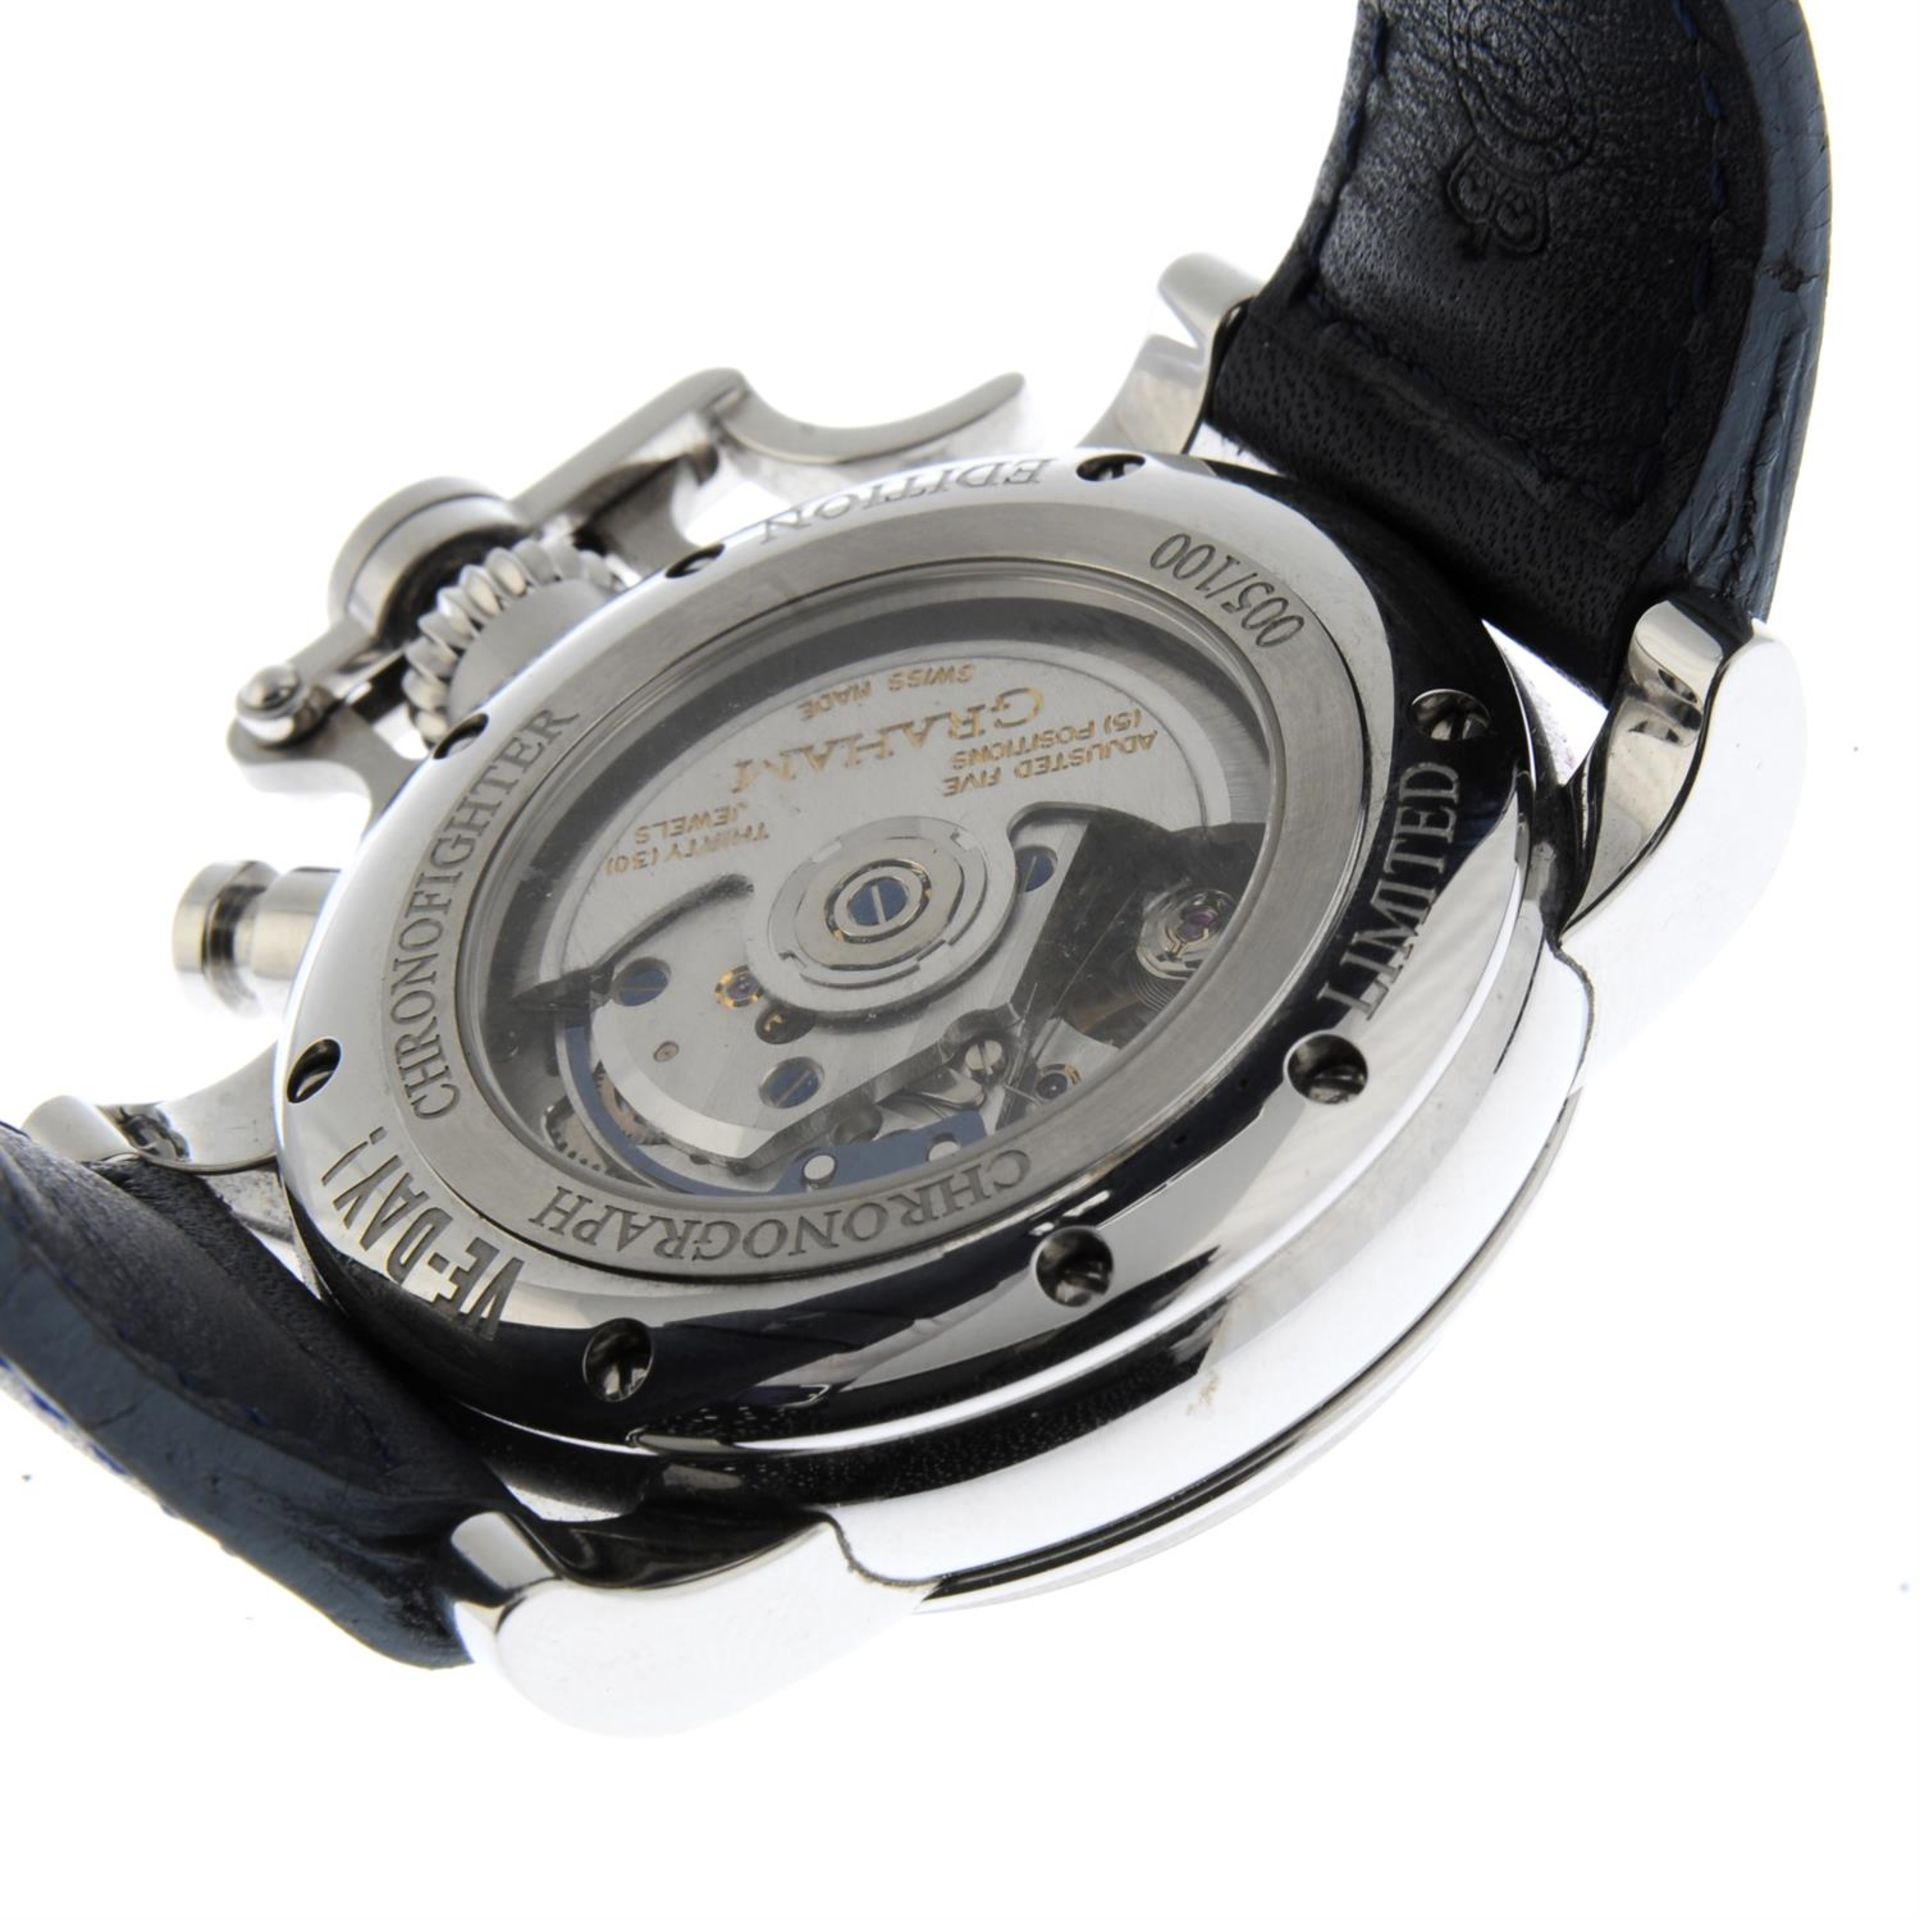 GRAHAM - a limited edition stainless steel Chronofighter 'VE-DAY' wrist watch, 41mm. - Image 2 of 6